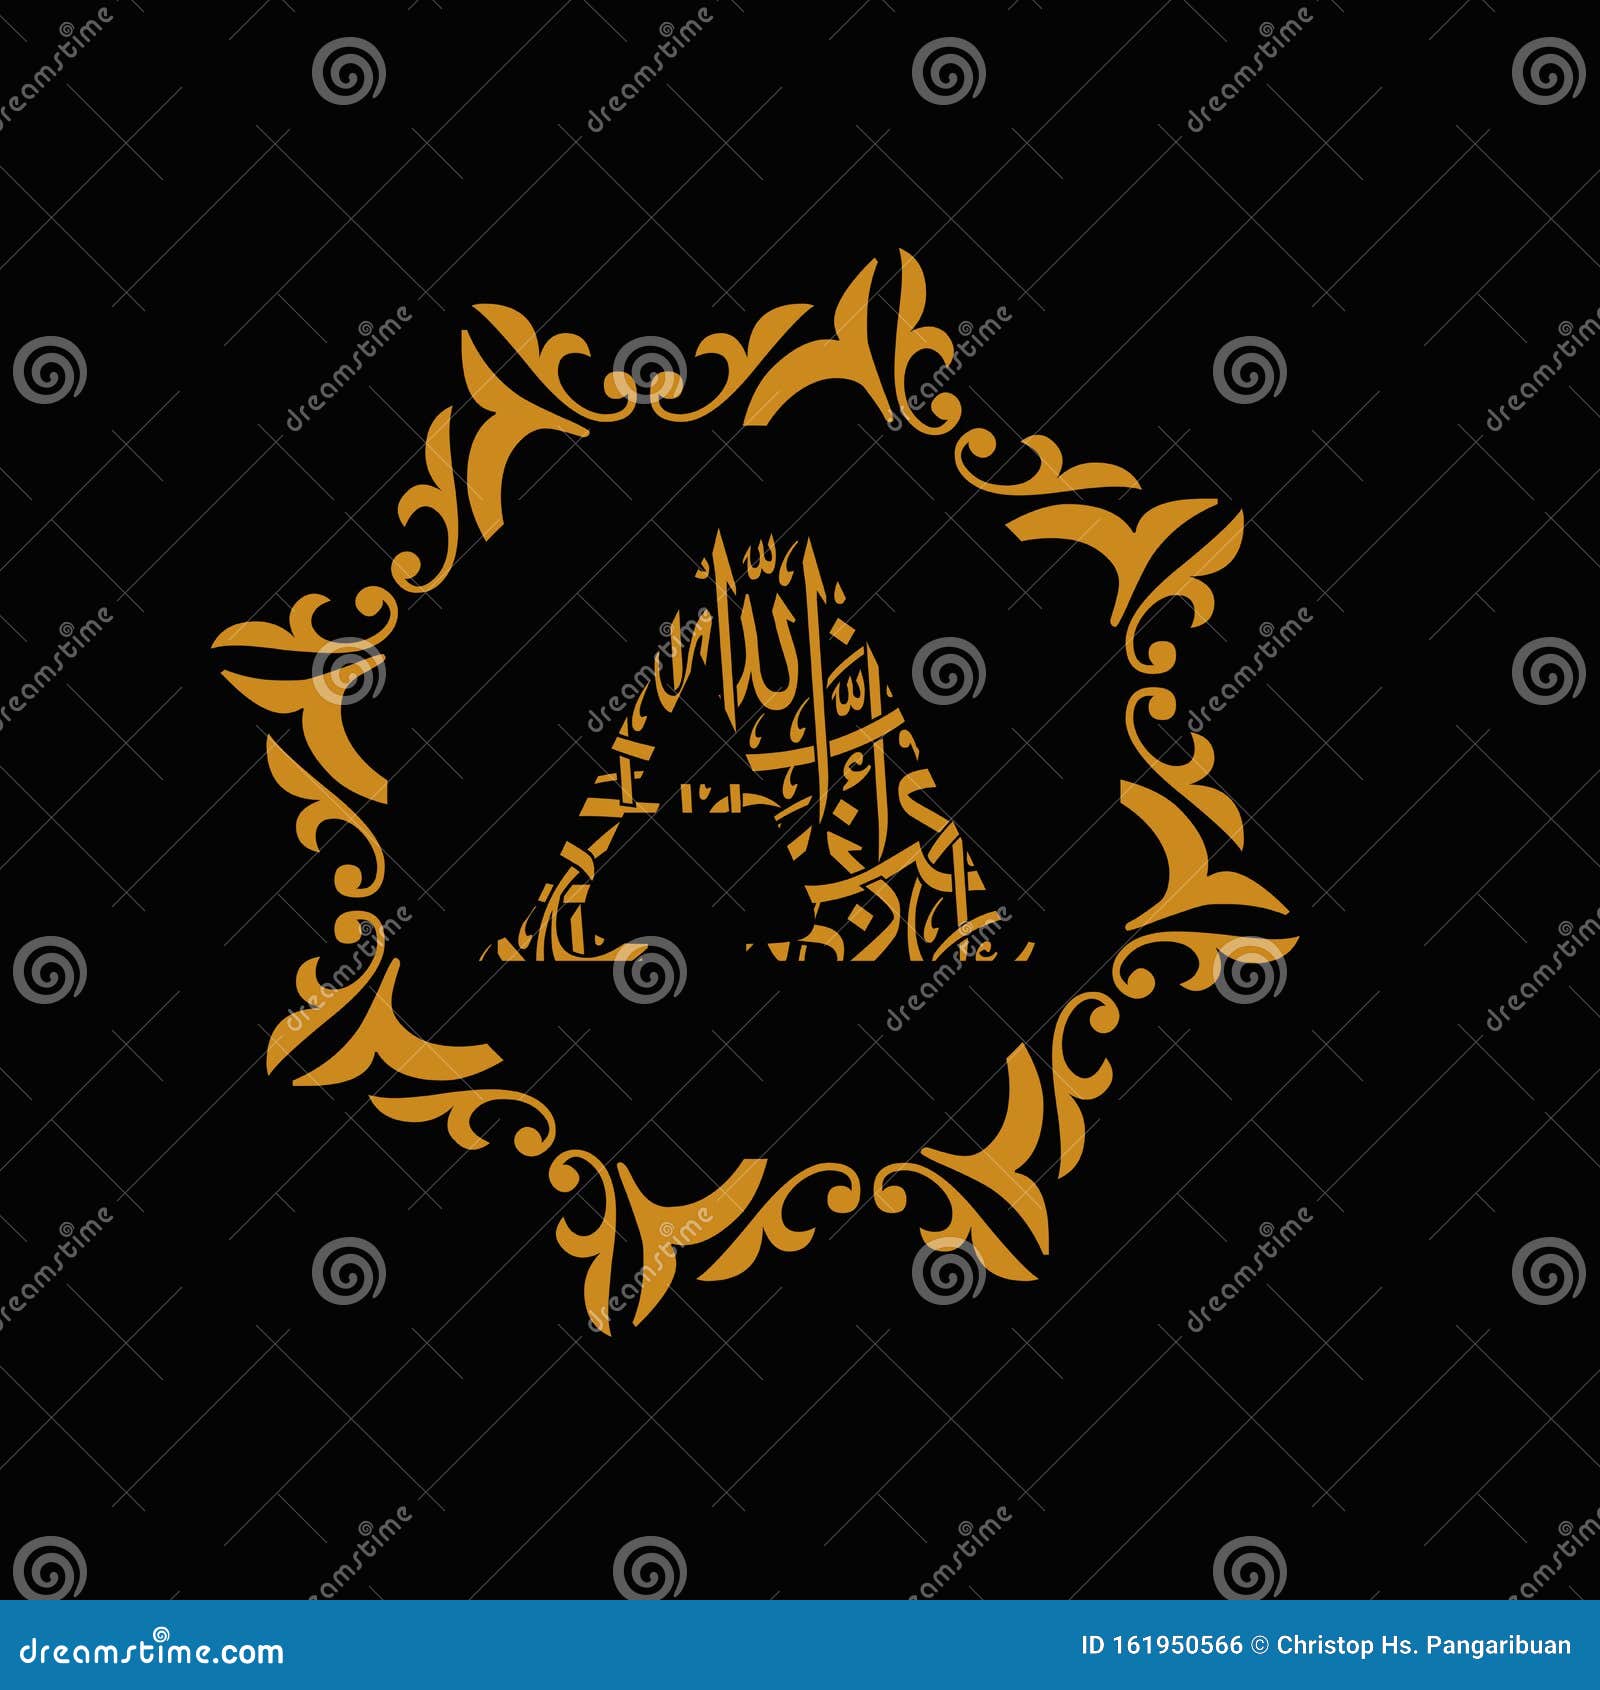 The Golden a Arabic Islamic Style Logo Symbol Letter with Black Background  Stock Illustration - Illustration of letter, silver: 161950566